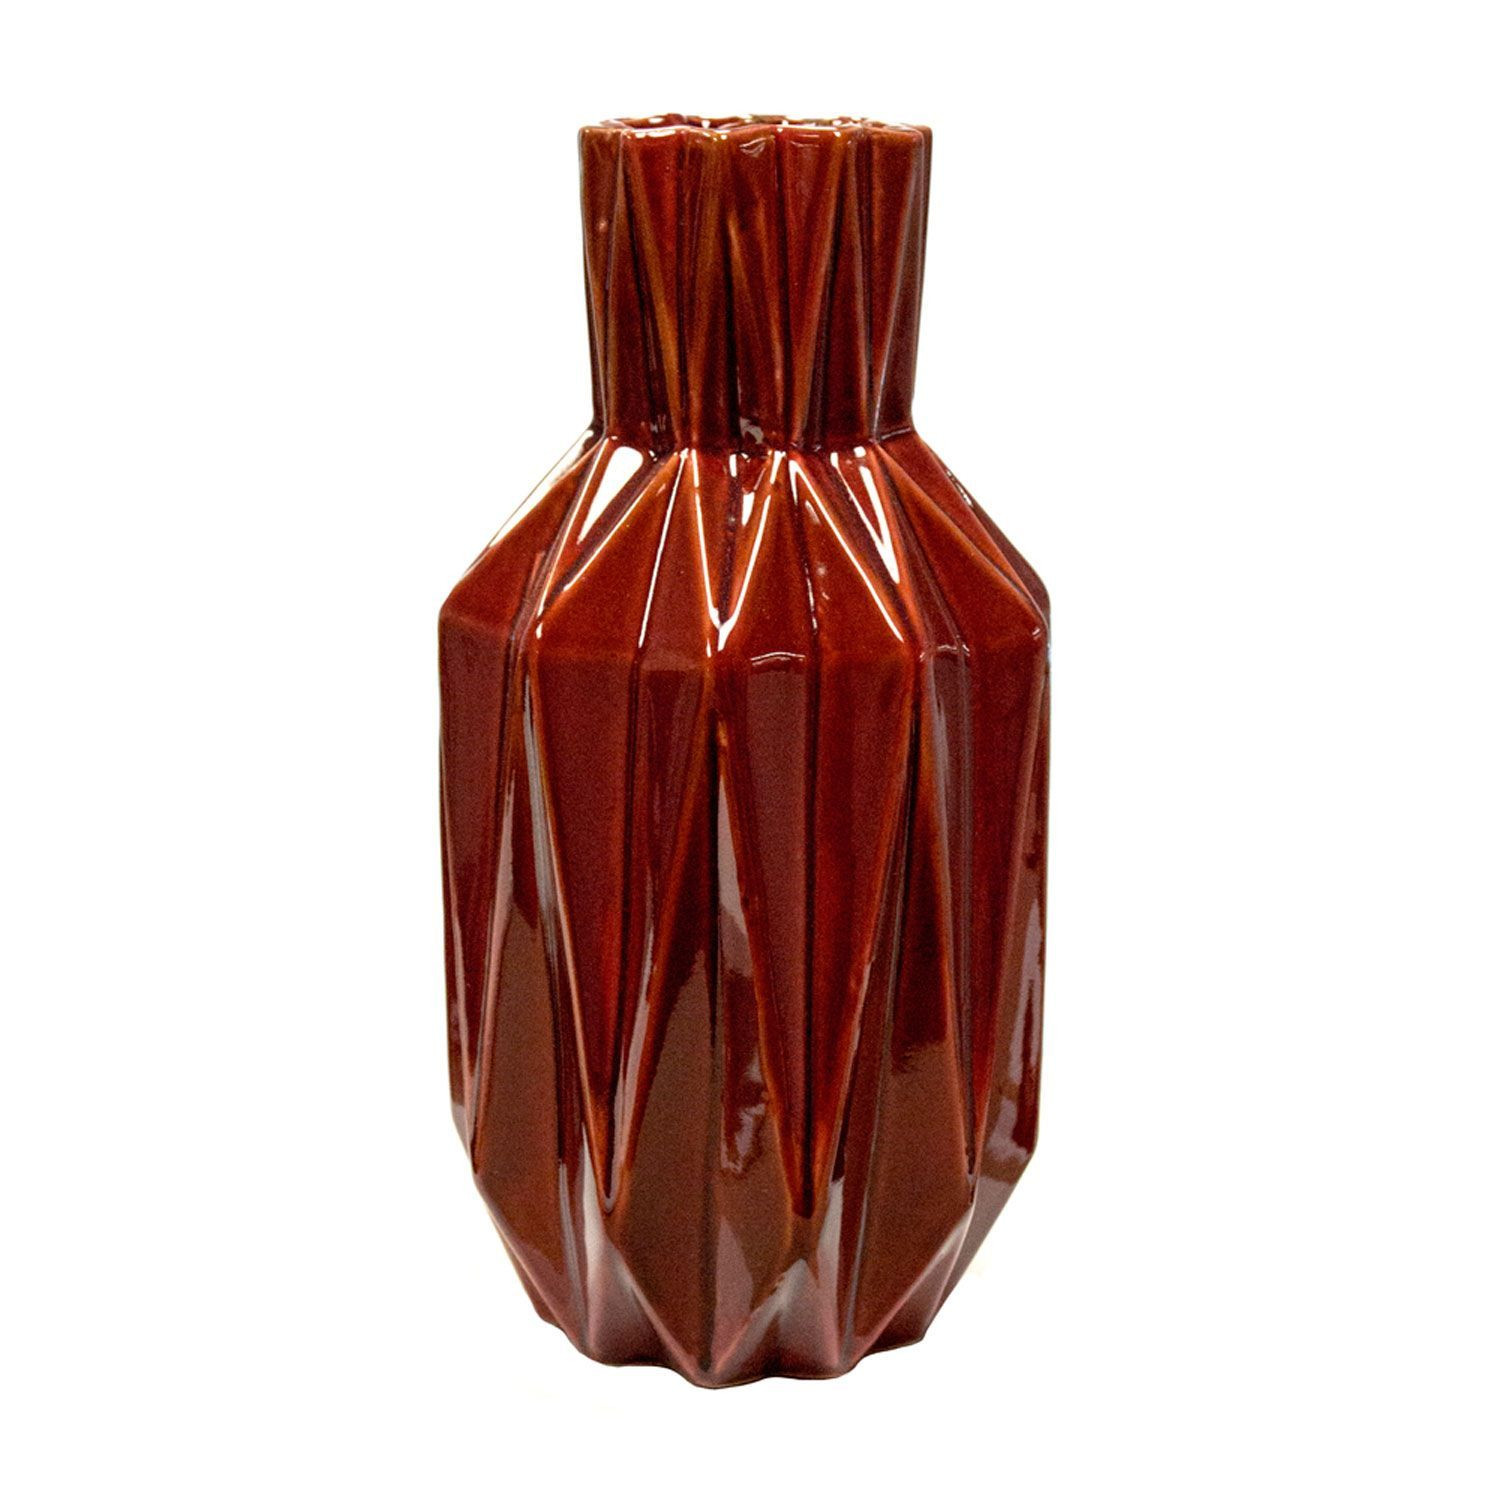 vintage brown glass vase of 22 large chinese vases for the floor the weekly world pertaining to red calista bottle vase medium sagebrook home vases vases home decor